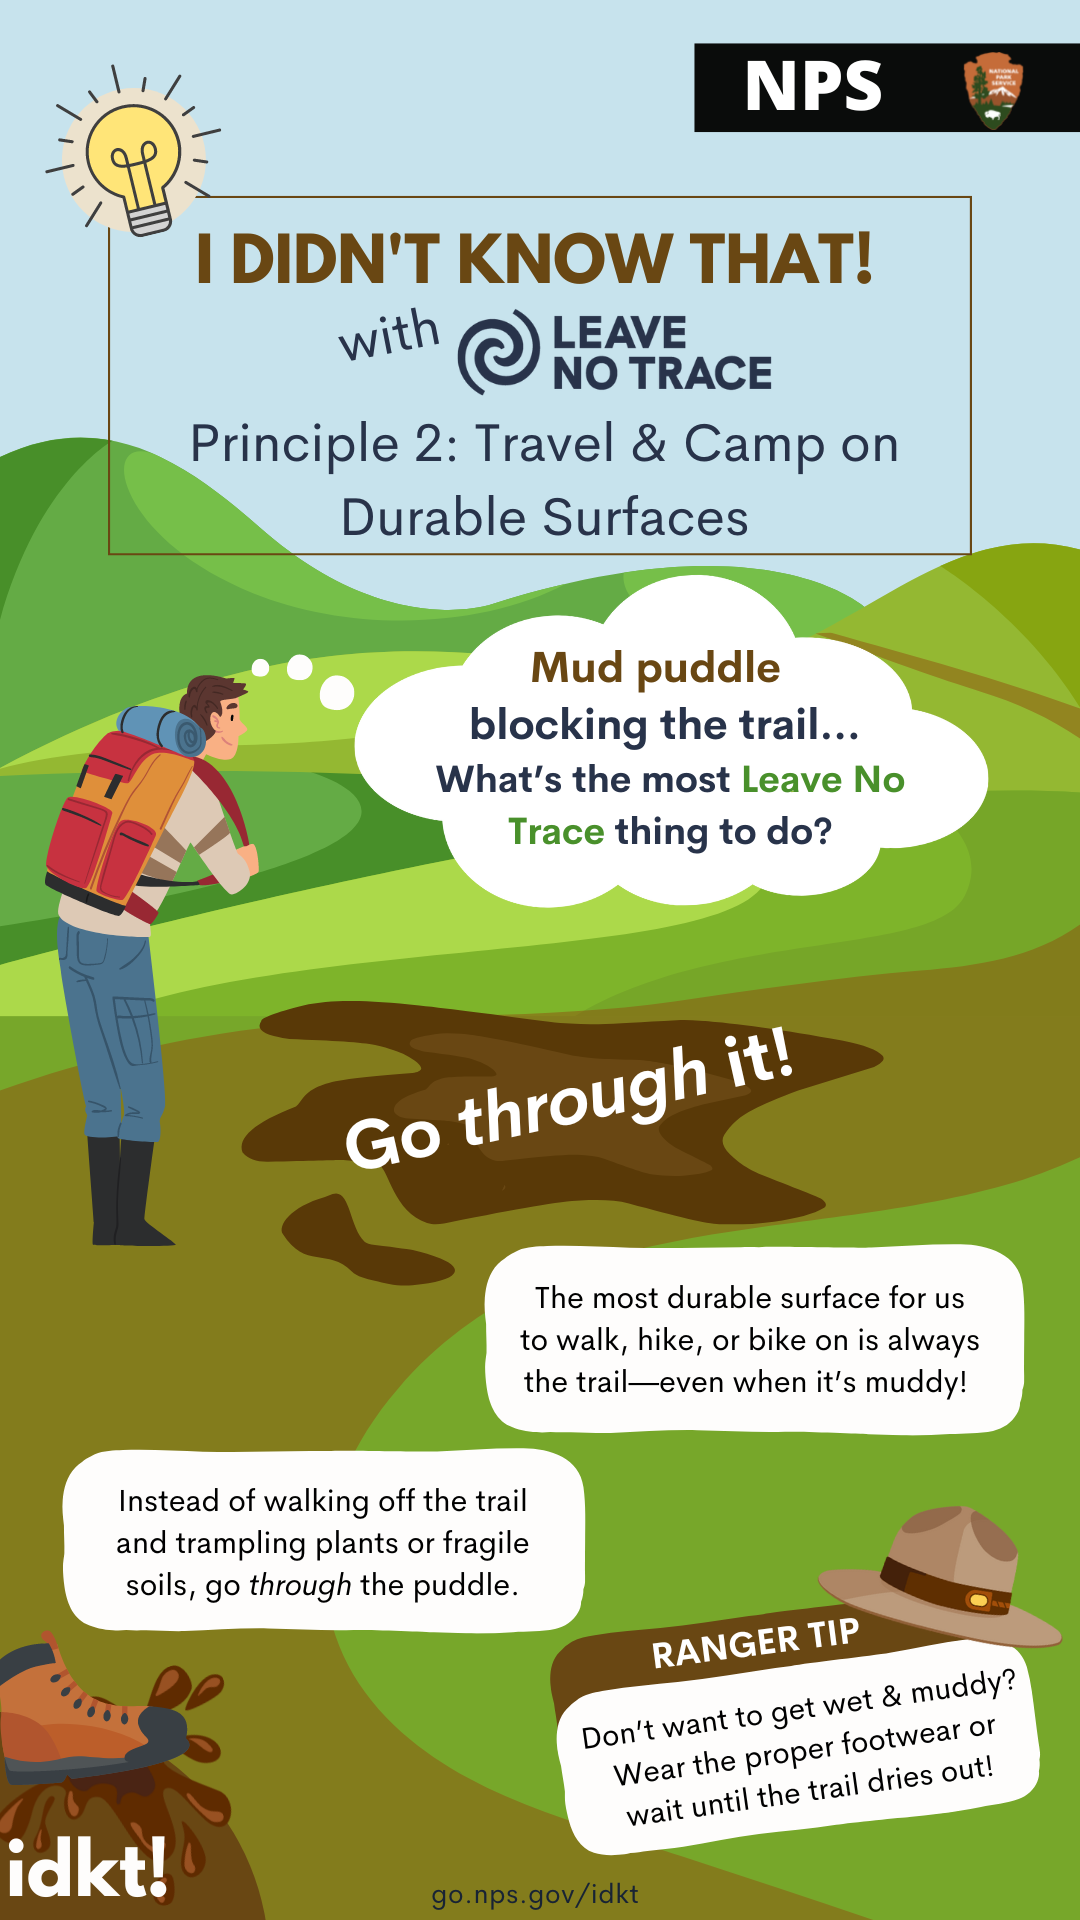 an infographic on what to do if you encounter a mud puddle blocking the trail.